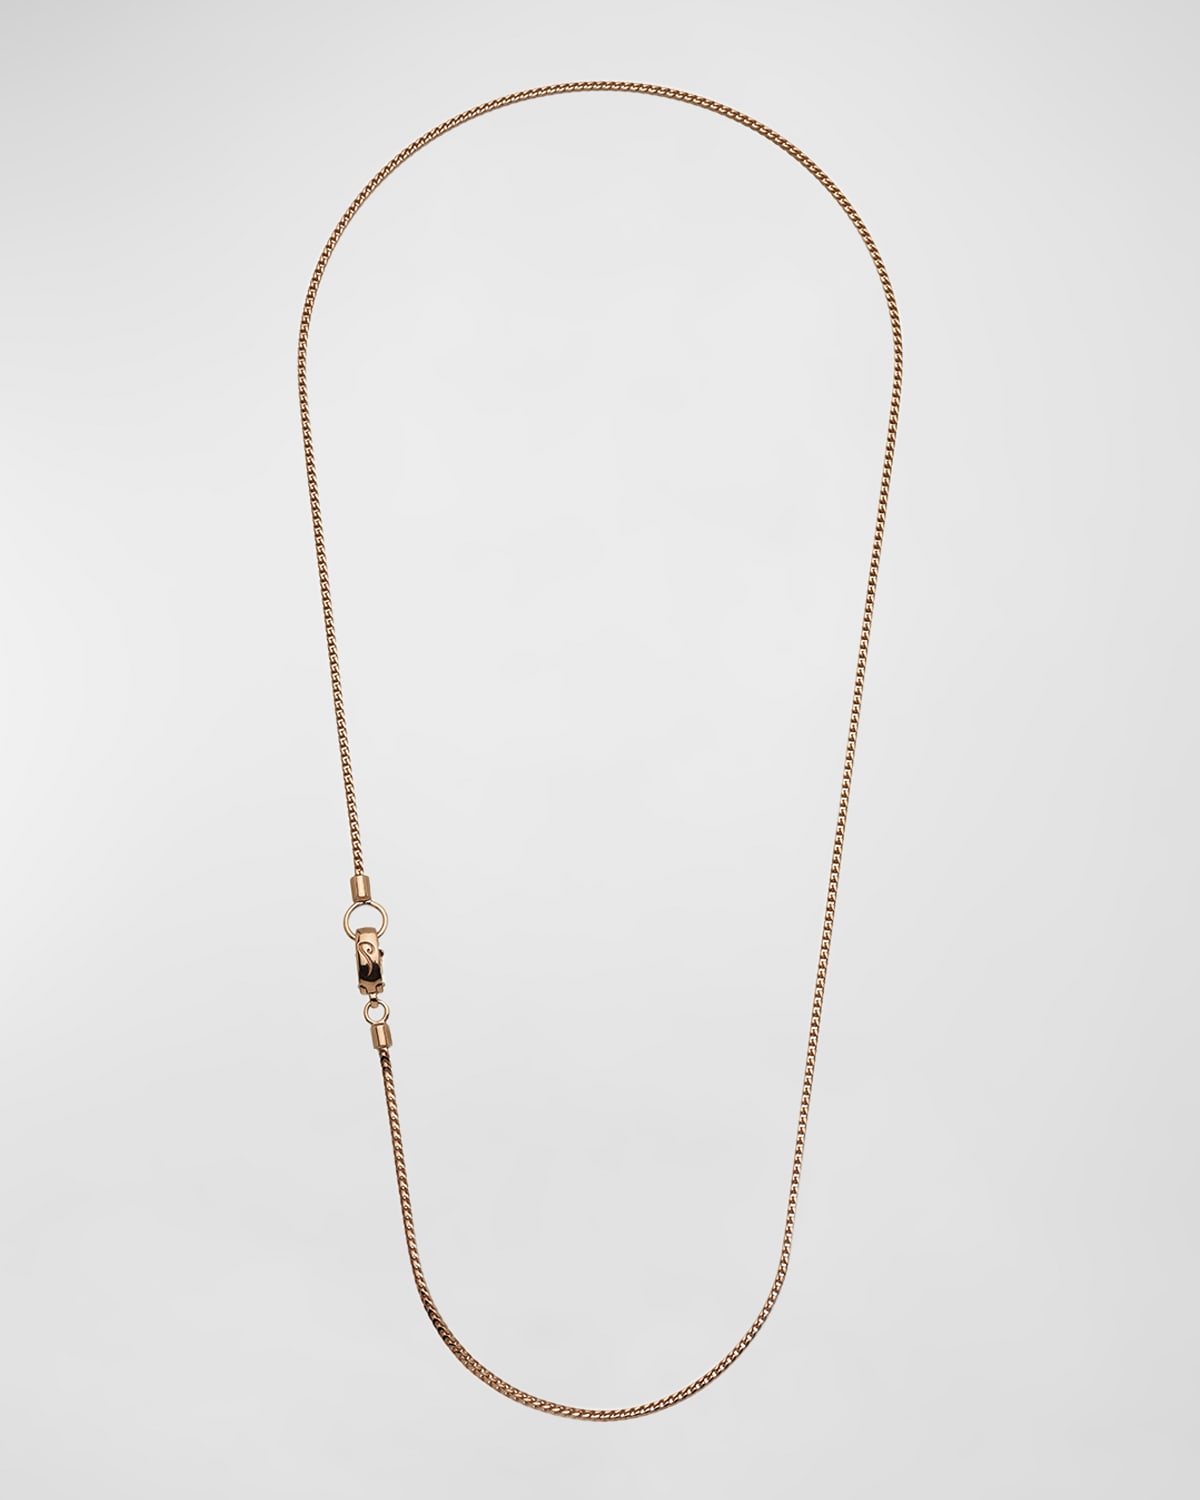 Marco Dal Maso Rose Gold Plated Silver Necklace With Polished Chain, 20"l